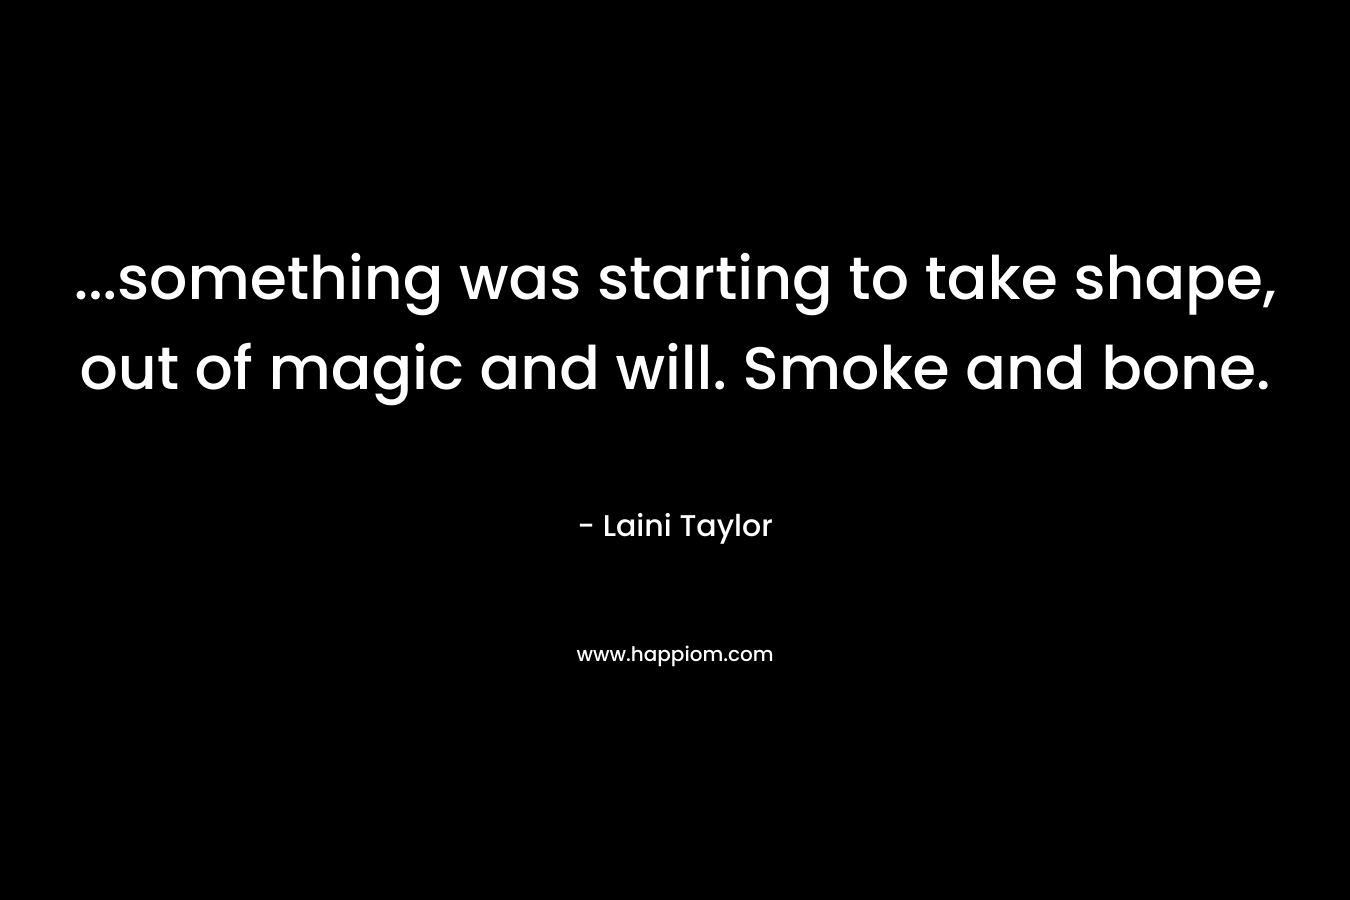 ...something was starting to take shape, out of magic and will. Smoke and bone.